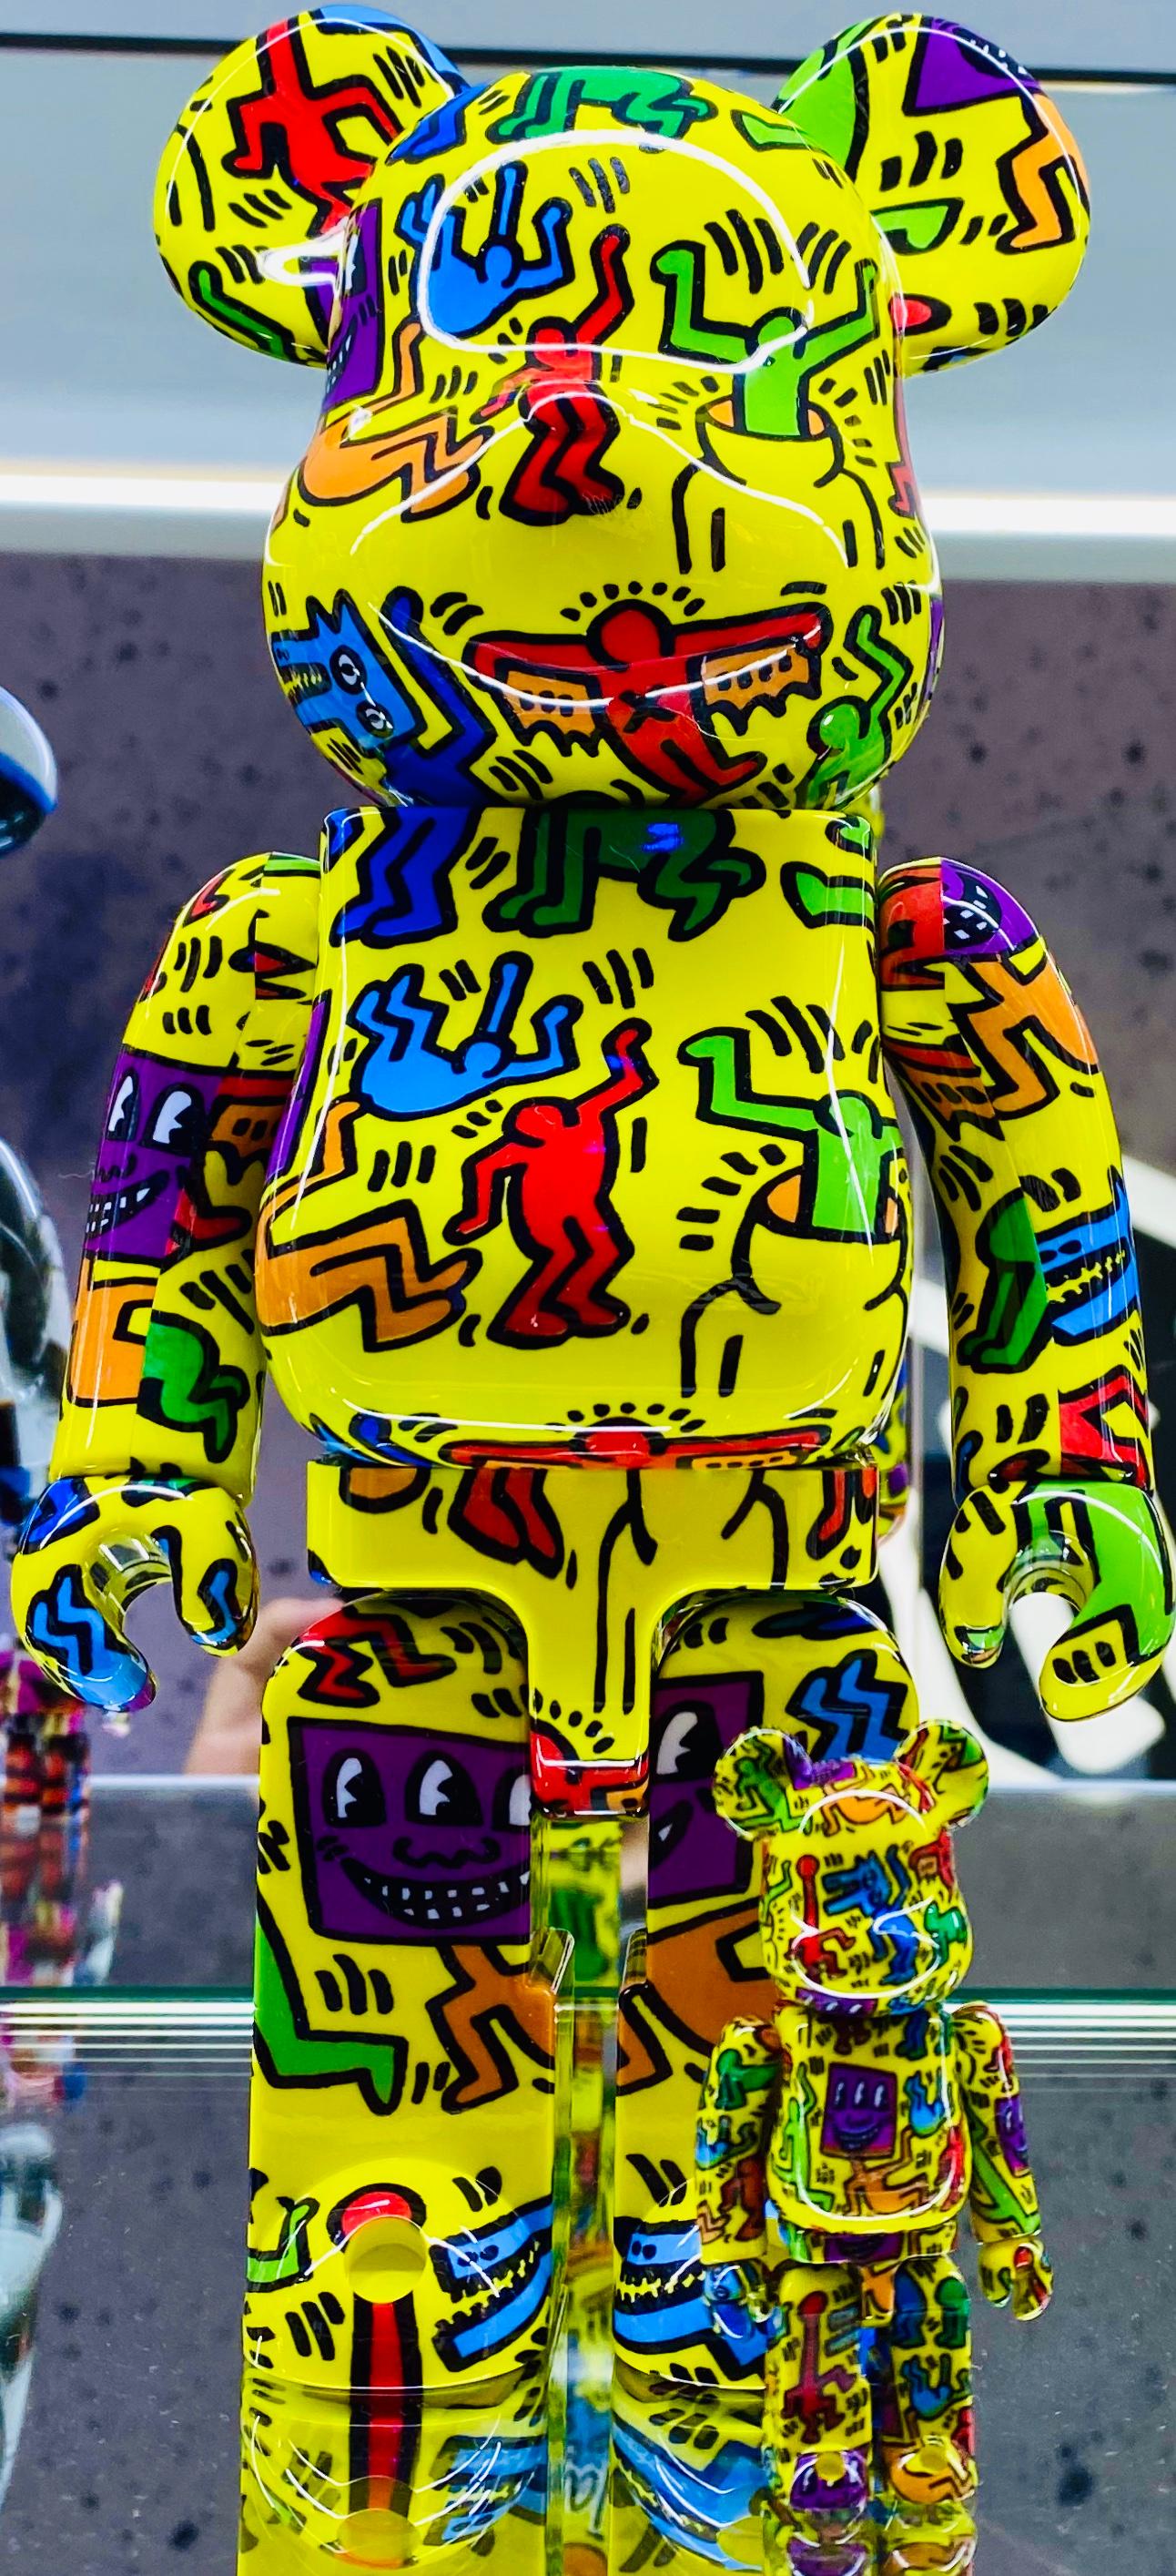 Keith Haring Bearbrick 400 % Companion (Haring BE@RBRICK) - Sculpture de (after) Keith Haring